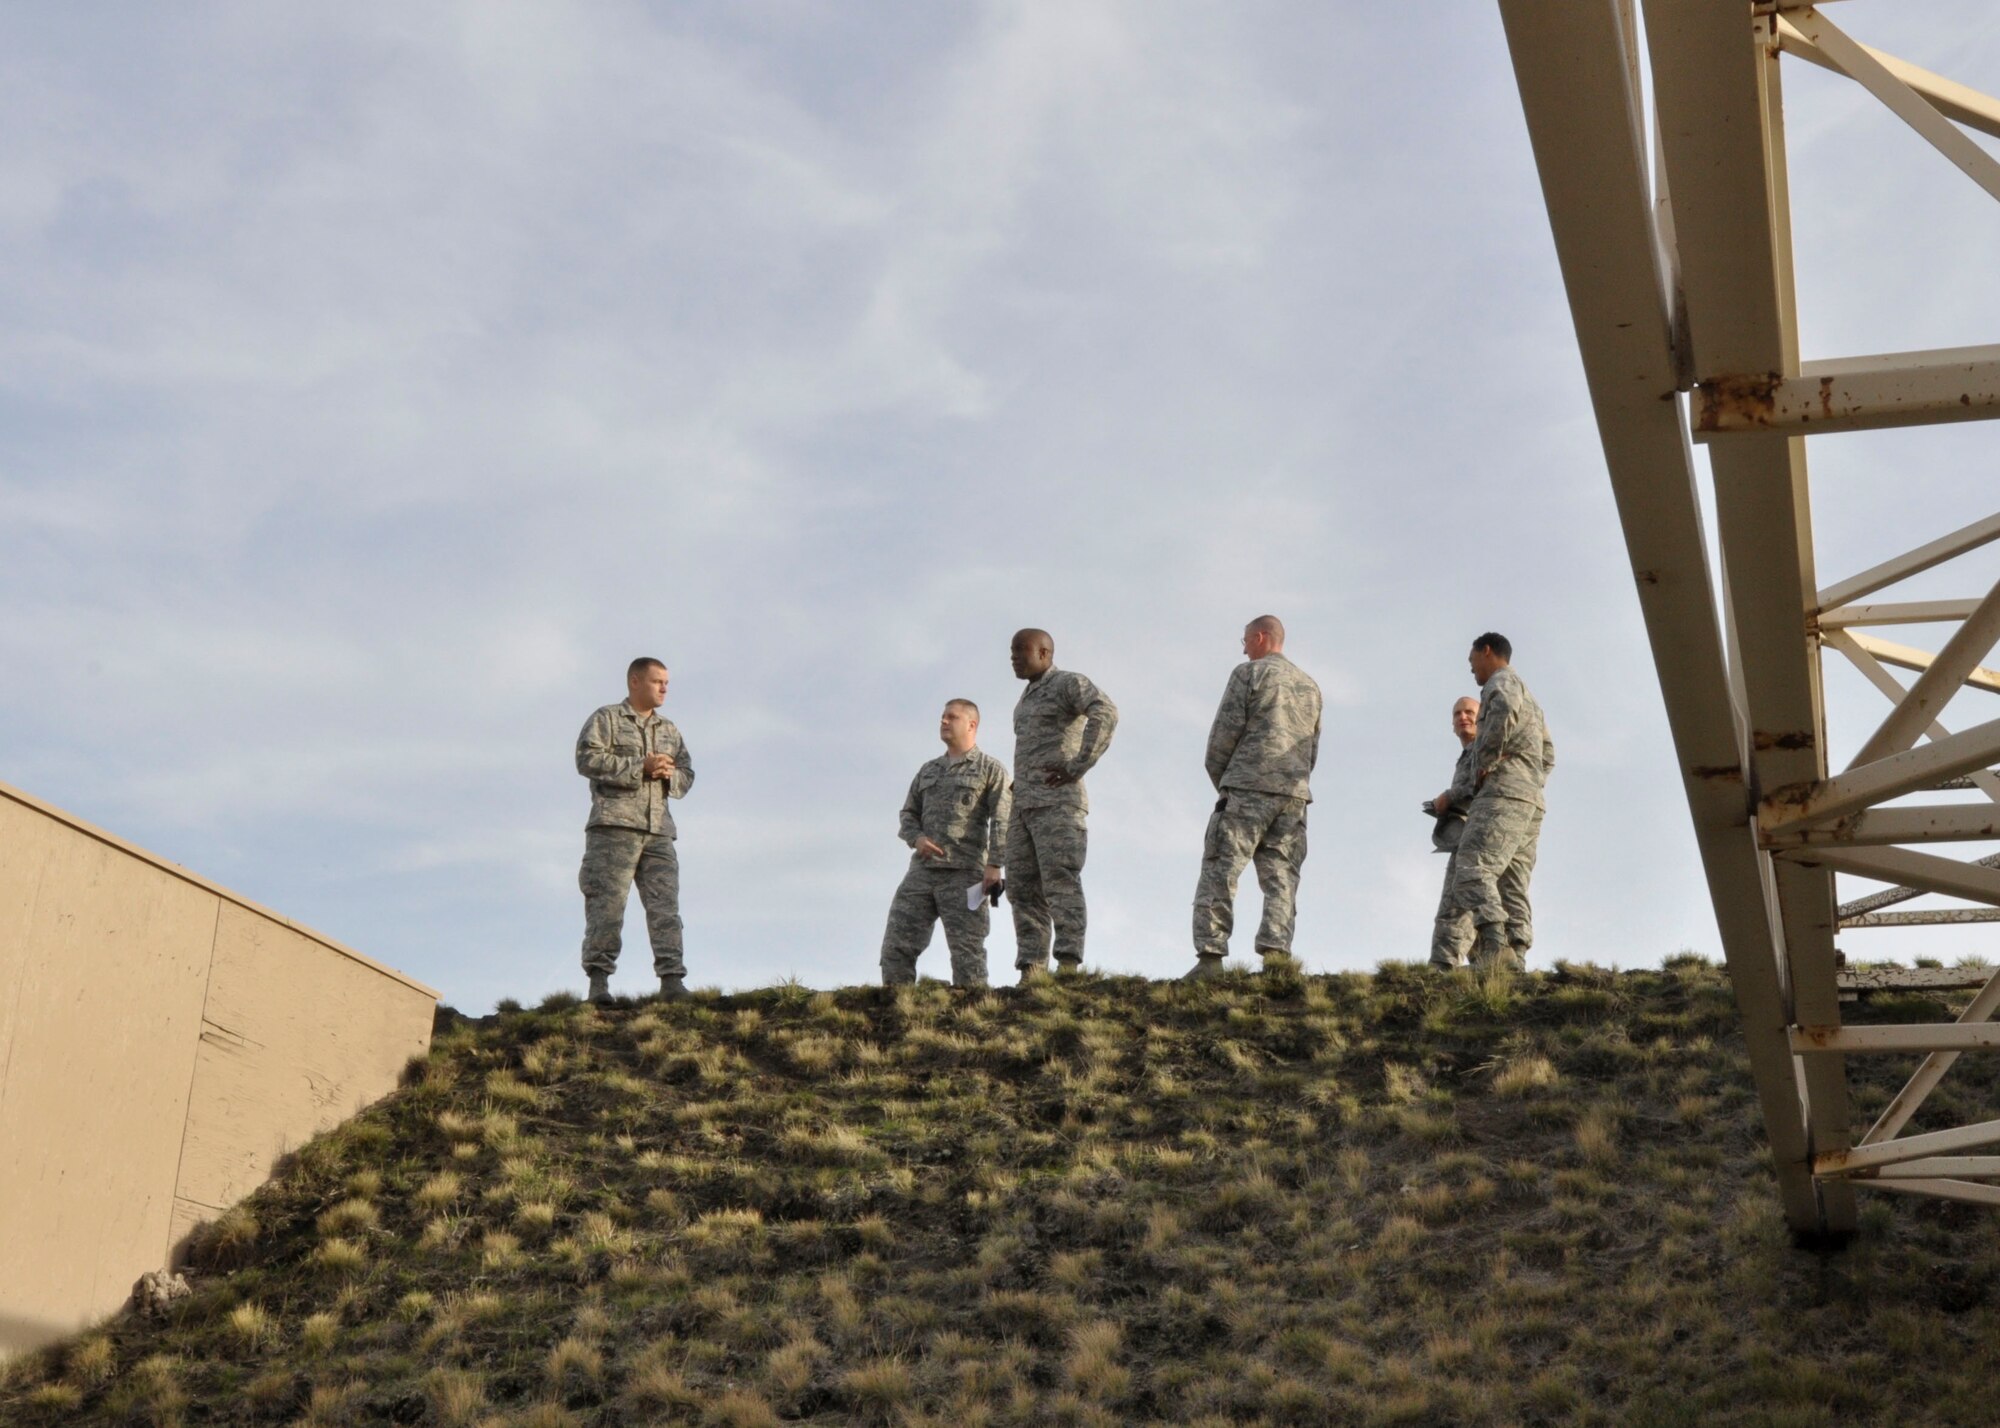 Brig. Gen. Stacey Hawkins, Air Mobility Command director of logistics, engineering and force protection, (seen center), speaks with members of the 92nd Security Forces Squadron at the top of the combat arms range during a base tour Nov. 7, 2016, at Fairchild Air Force Base, Wash. The embankment surrounding the range prevents gunfire from escaping the enclosed area. Hawkins visited the security forces squadron, maintenance squadron and the fire department during the tour. (U.S. Air Force photo/Airman 1st Class Taylor Shelton)